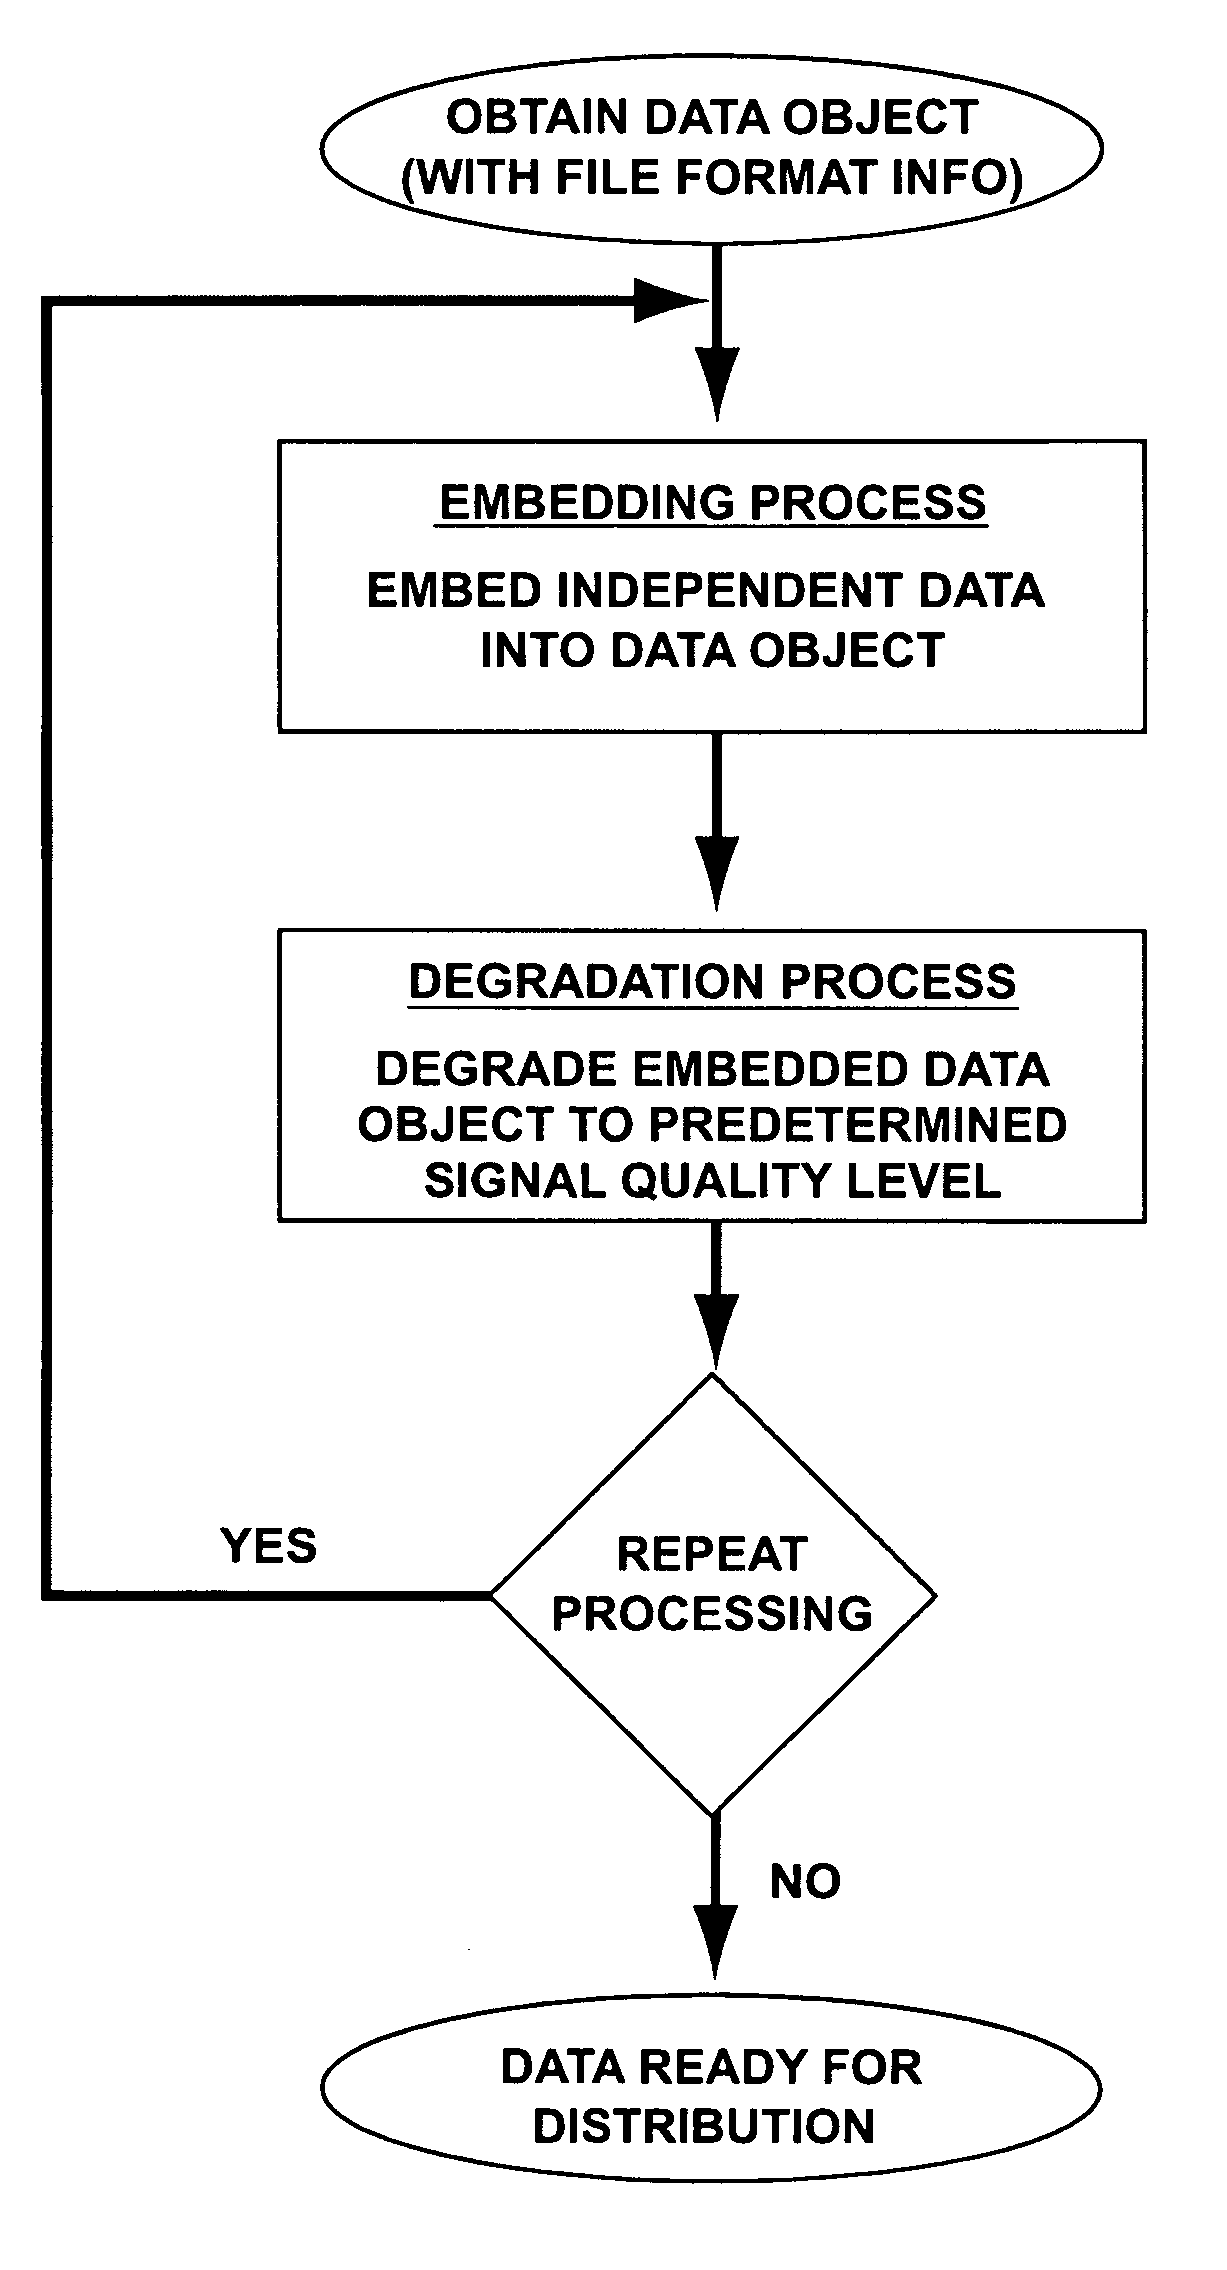 System and methods for permitting open access to data objects and for securing data within the data objects